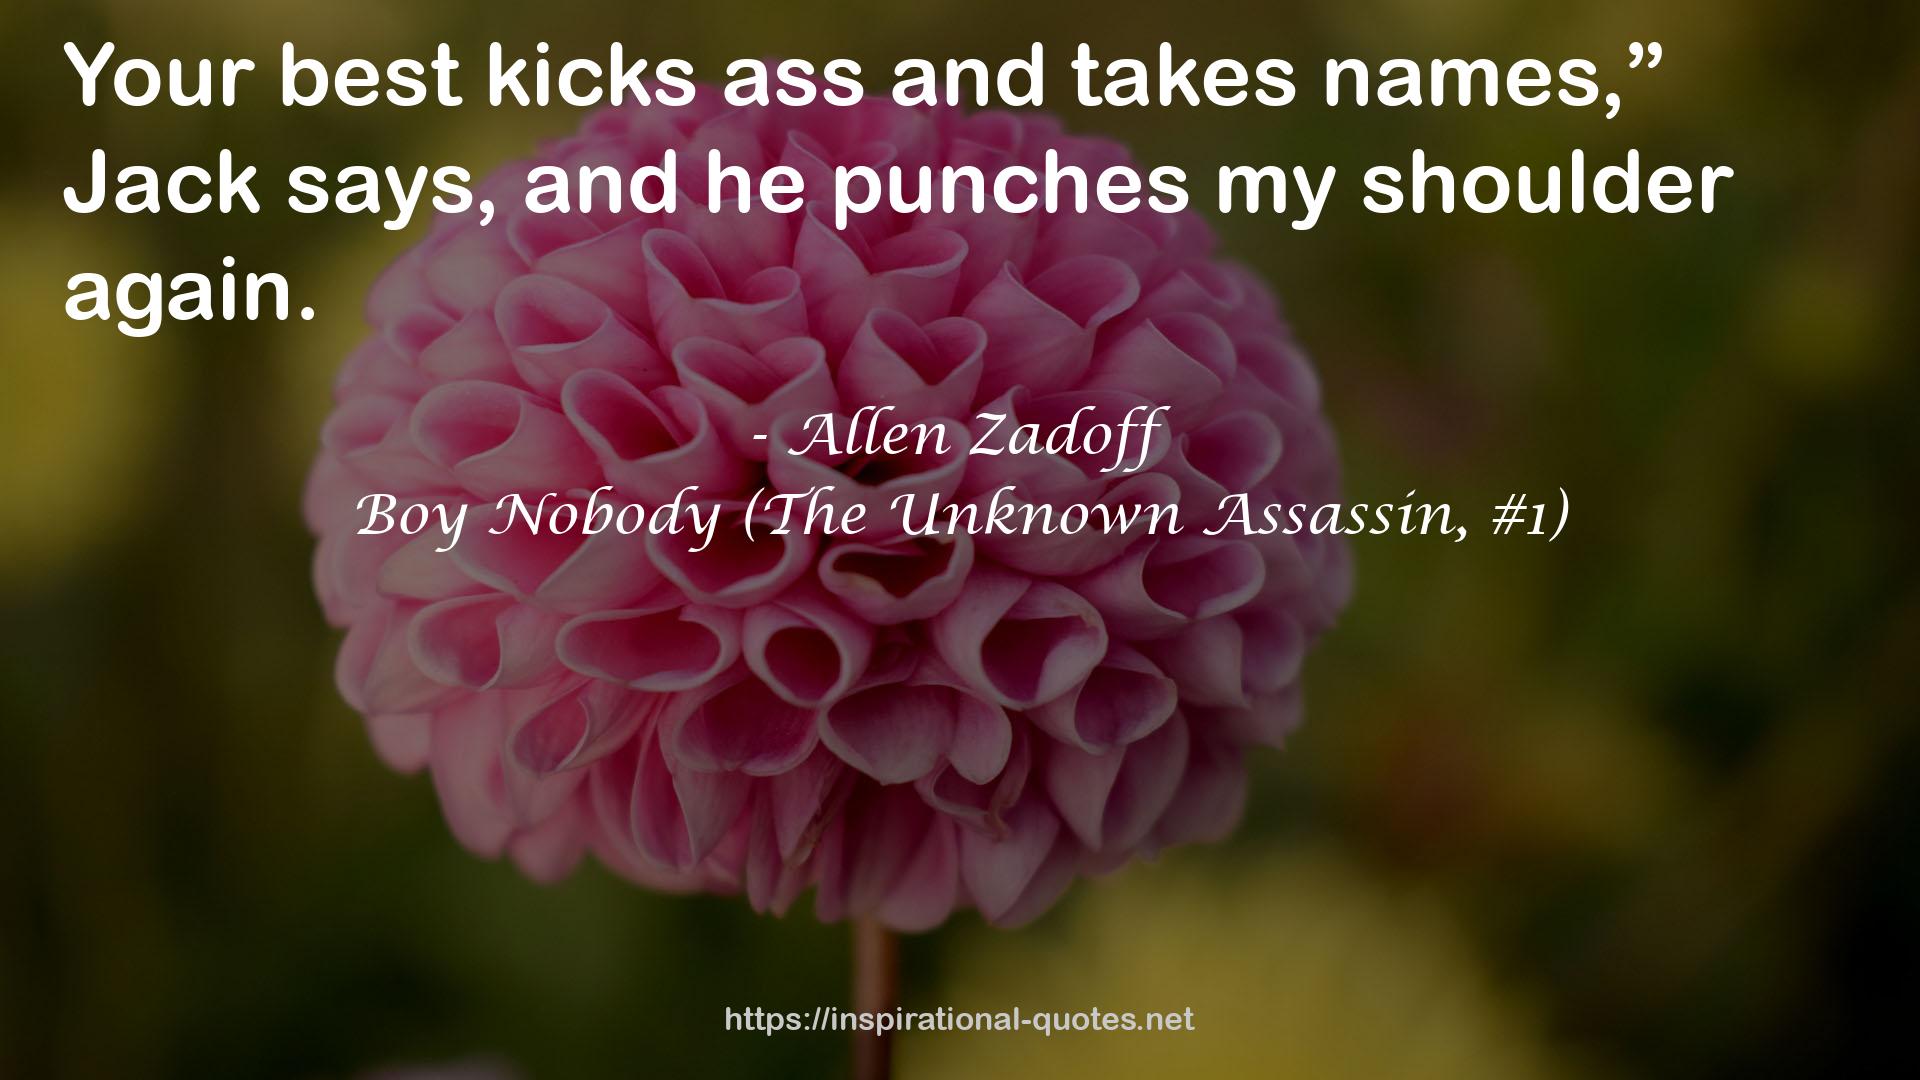 Boy Nobody (The Unknown Assassin, #1) QUOTES